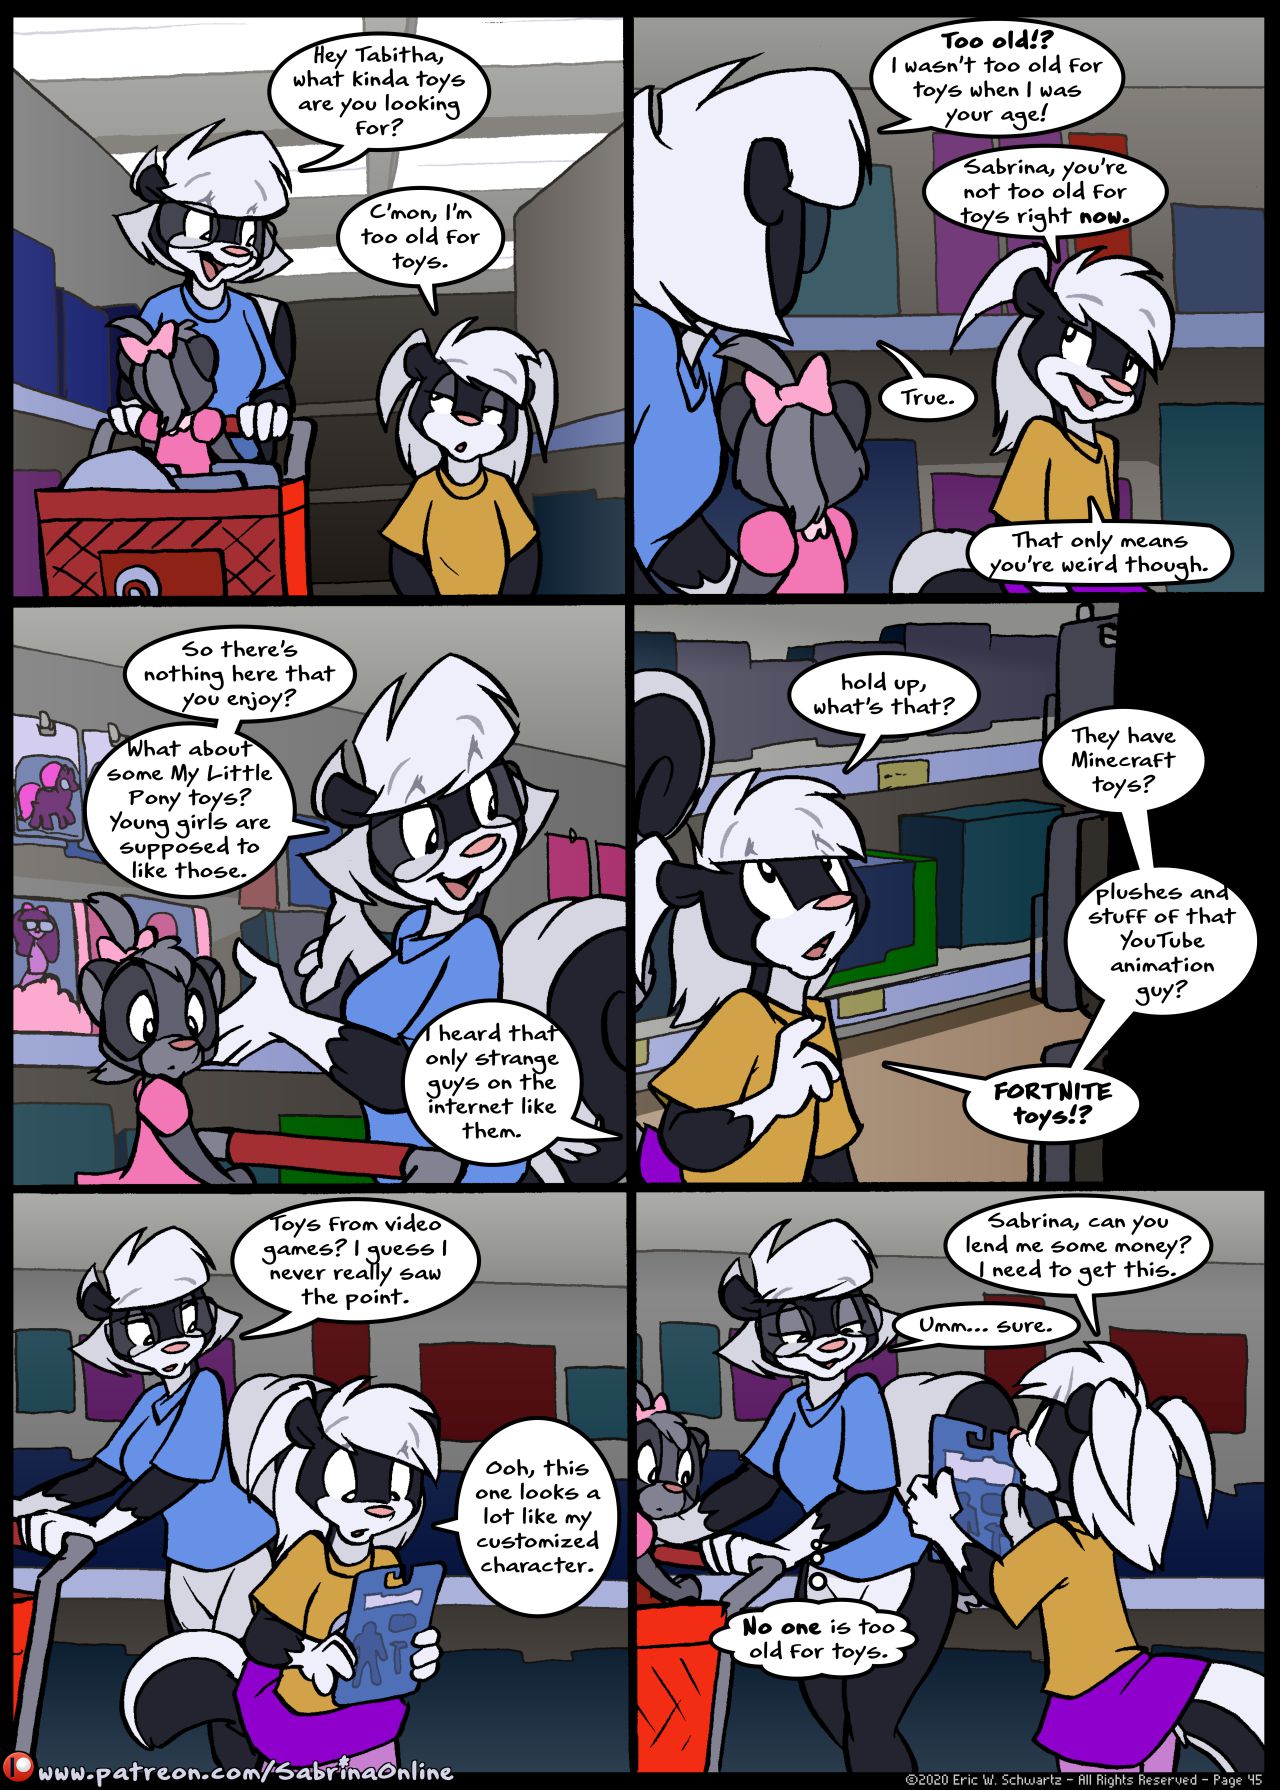 [Eric W. Schwartz] Sabrina Online: Skunks' Day Out (Ongoing) 45